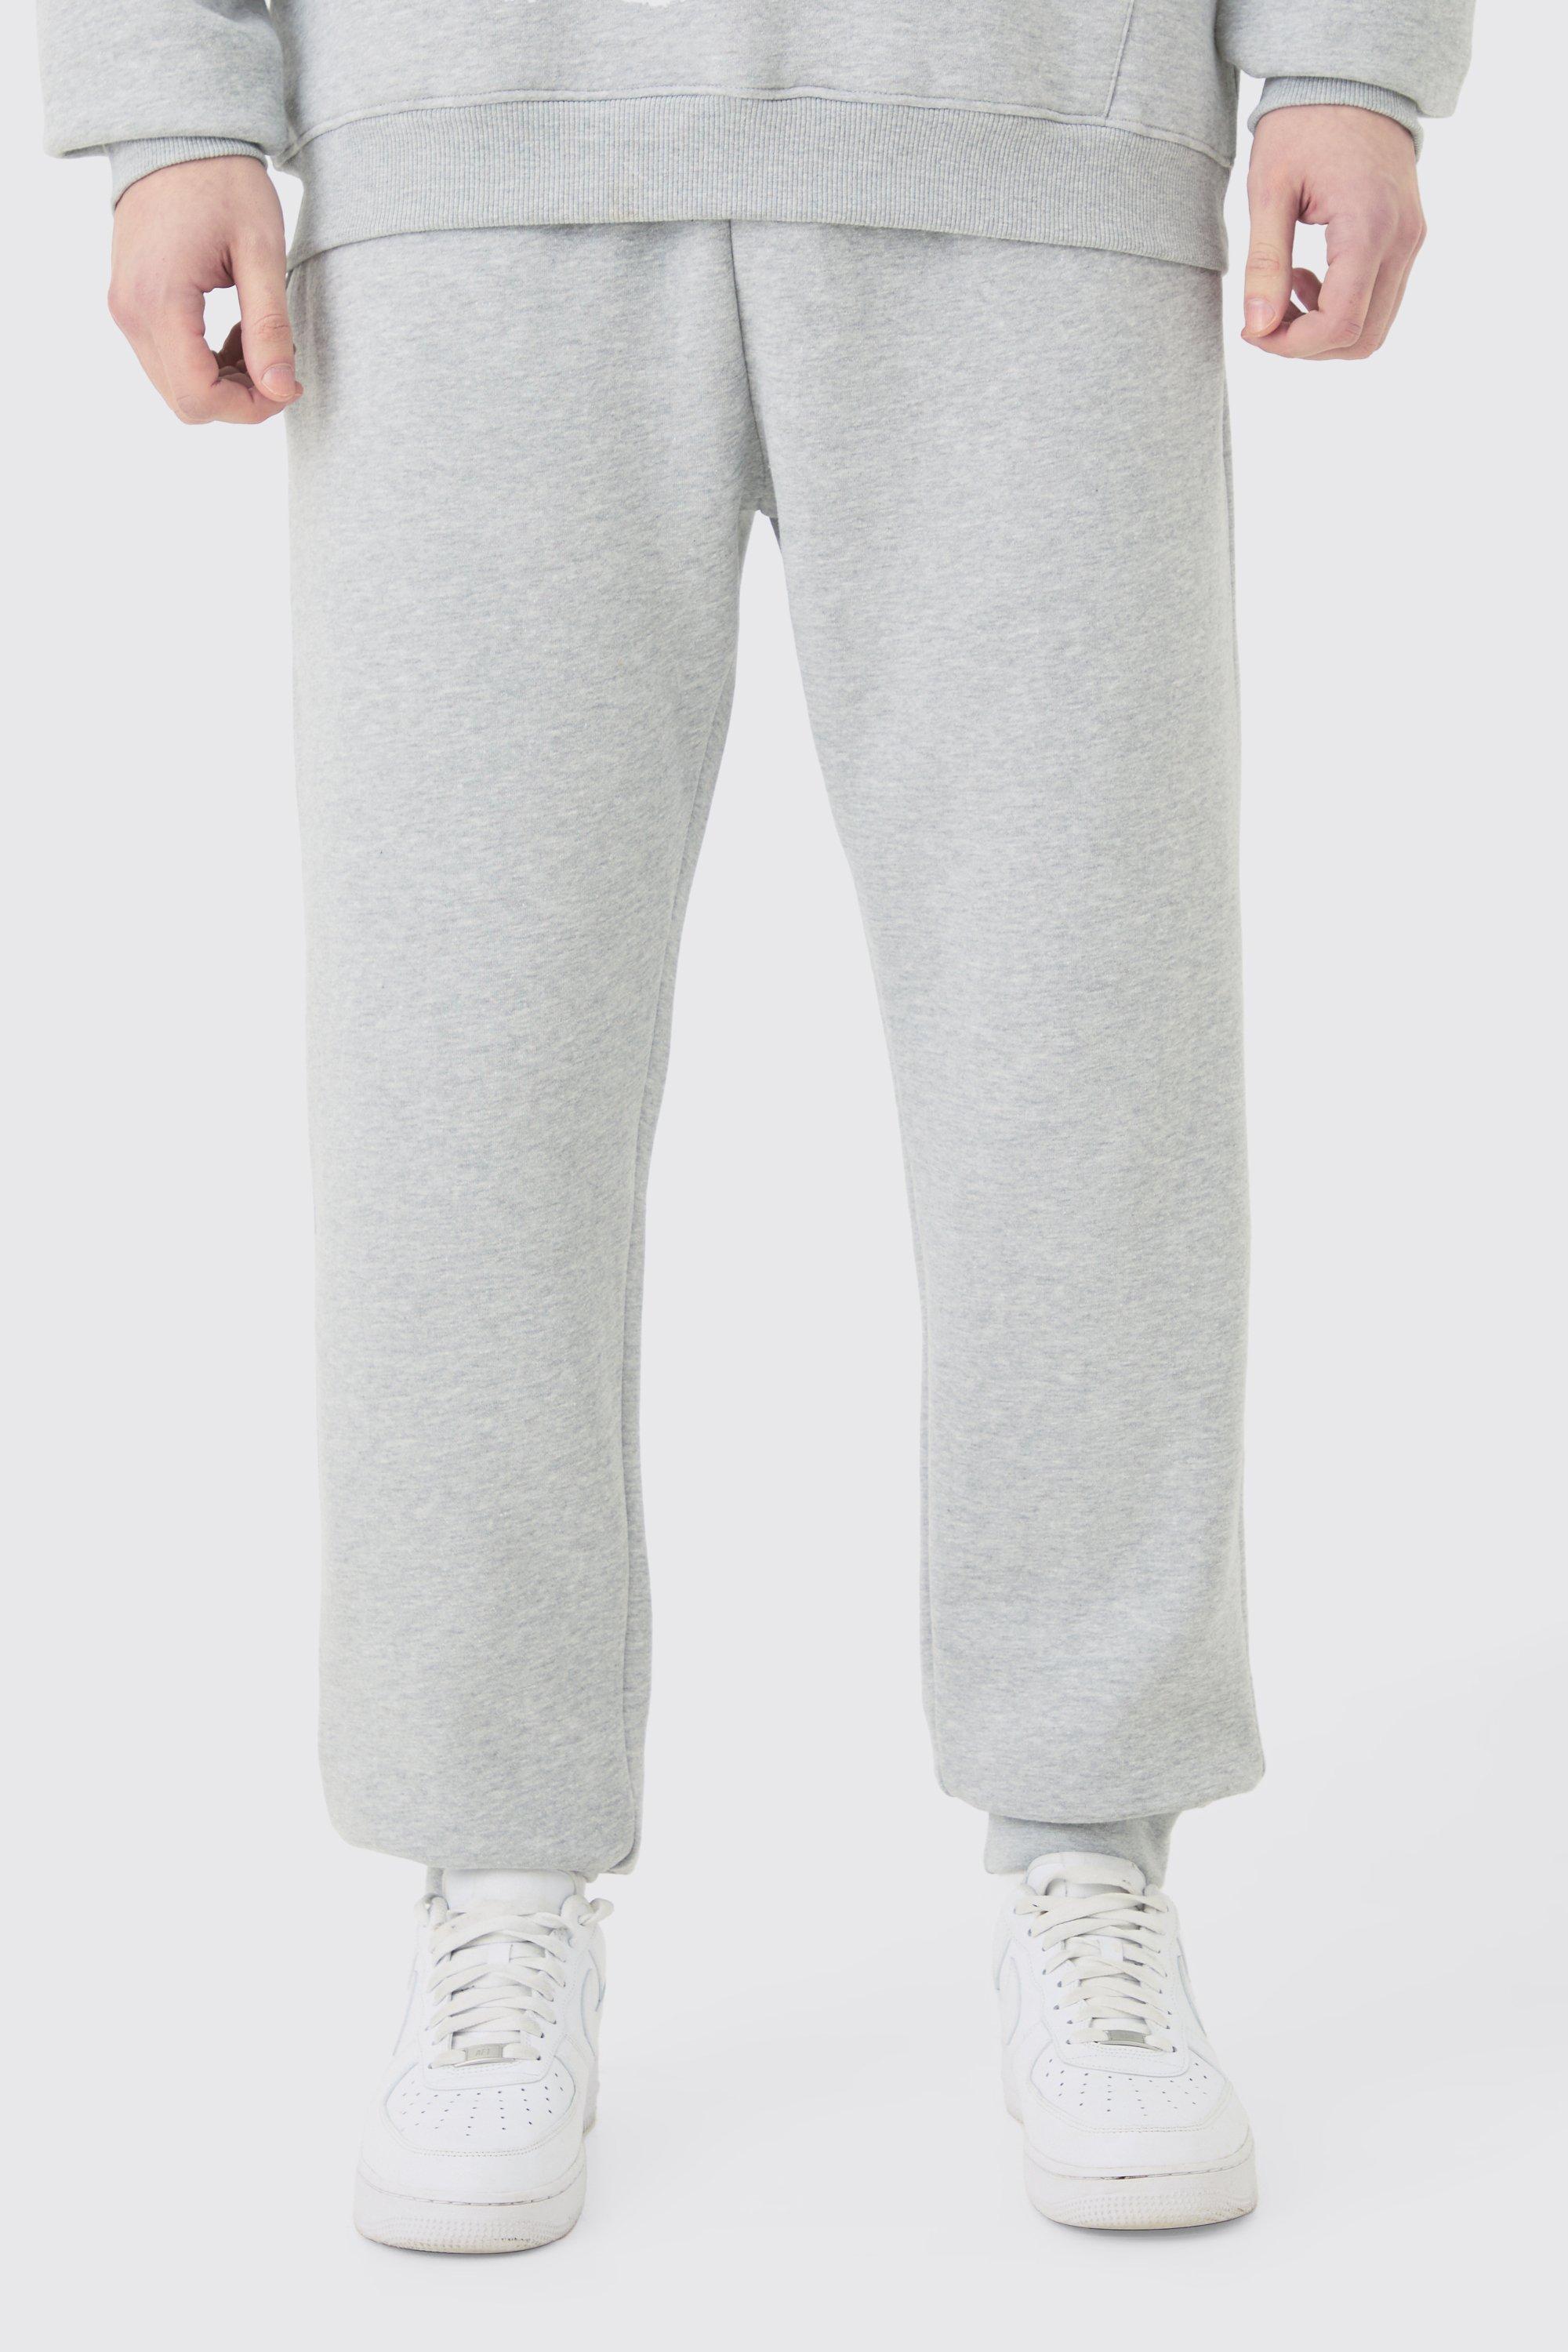 Image of Tall Basic Jogger In Grey Marl, Grigio